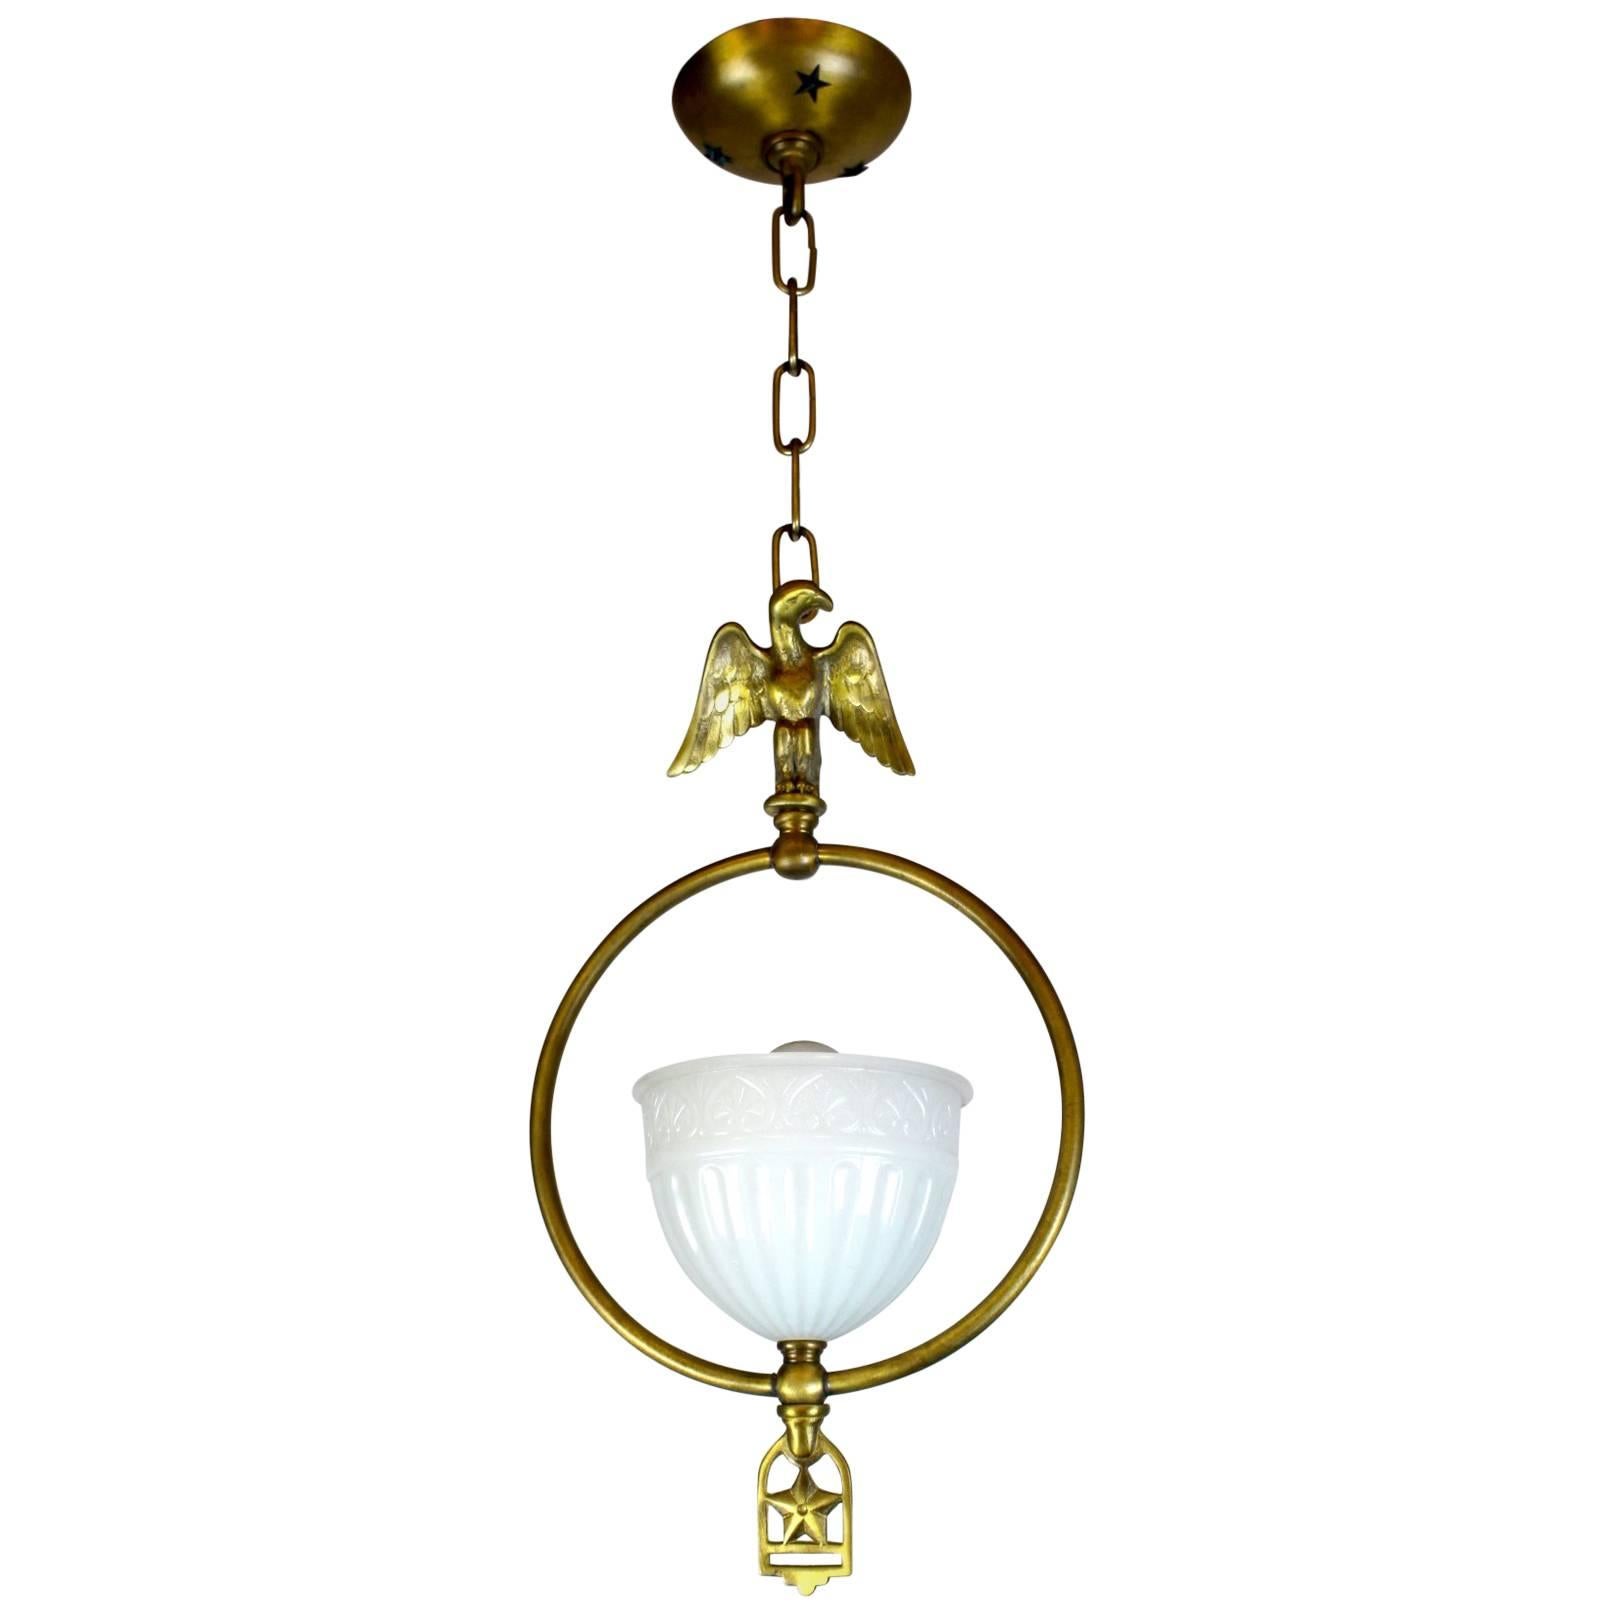 Eagle Pendant Fixture with Original Milk Glass Shade For Sale